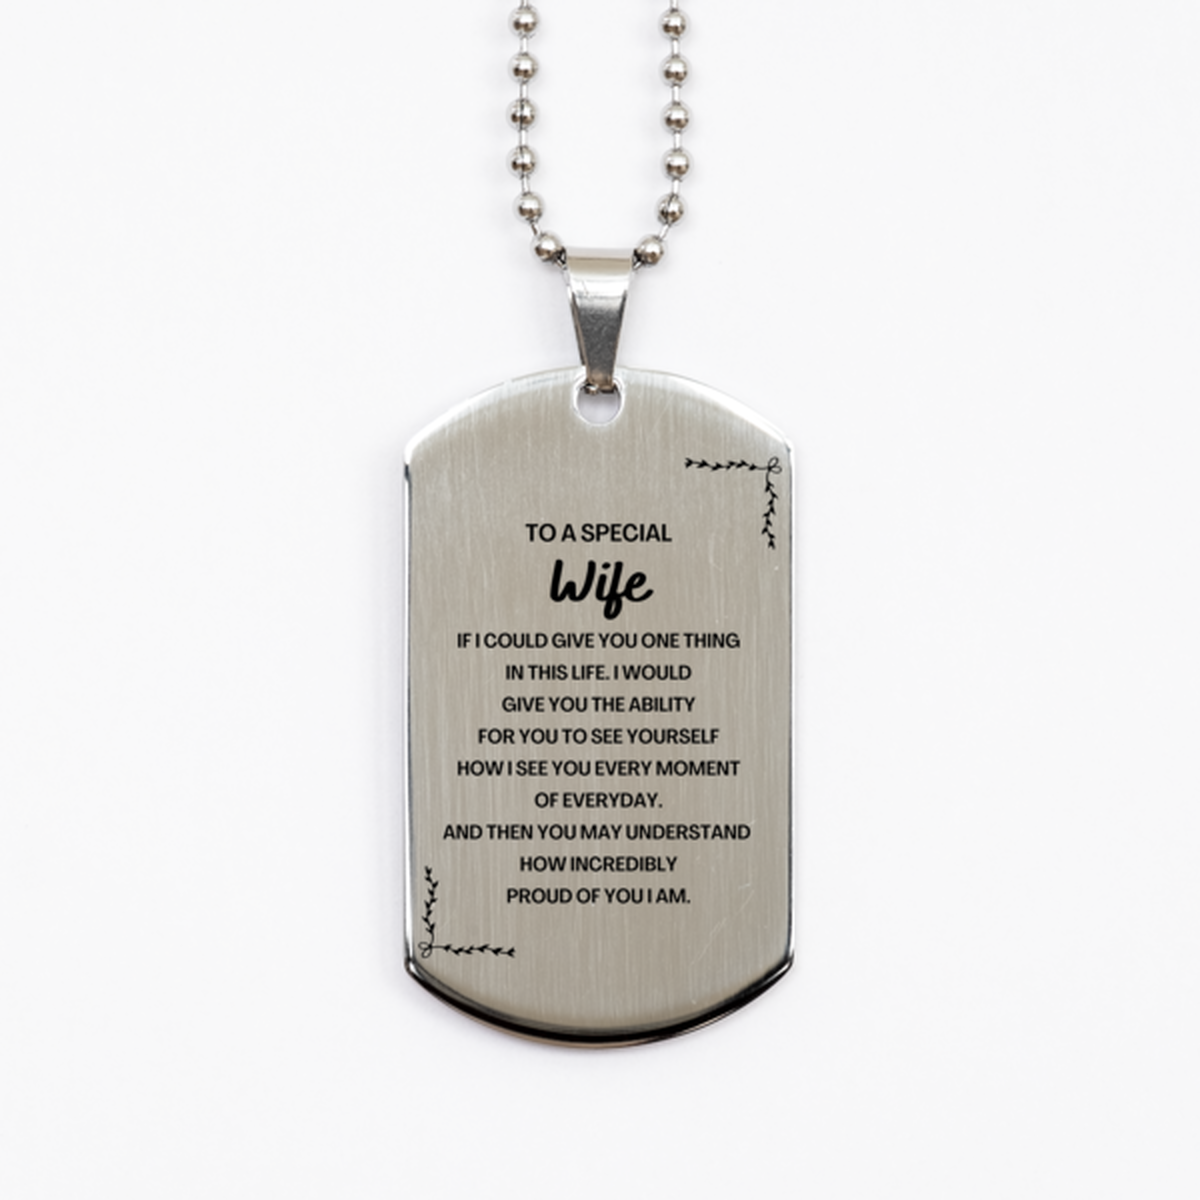 To My Wife Silver Dog Tag, Gifts For Wife Engraved, Inspirational Gifts for Christmas Birthday, Epic Gifts for Wife To A Special Wife how incredibly proud of you I am